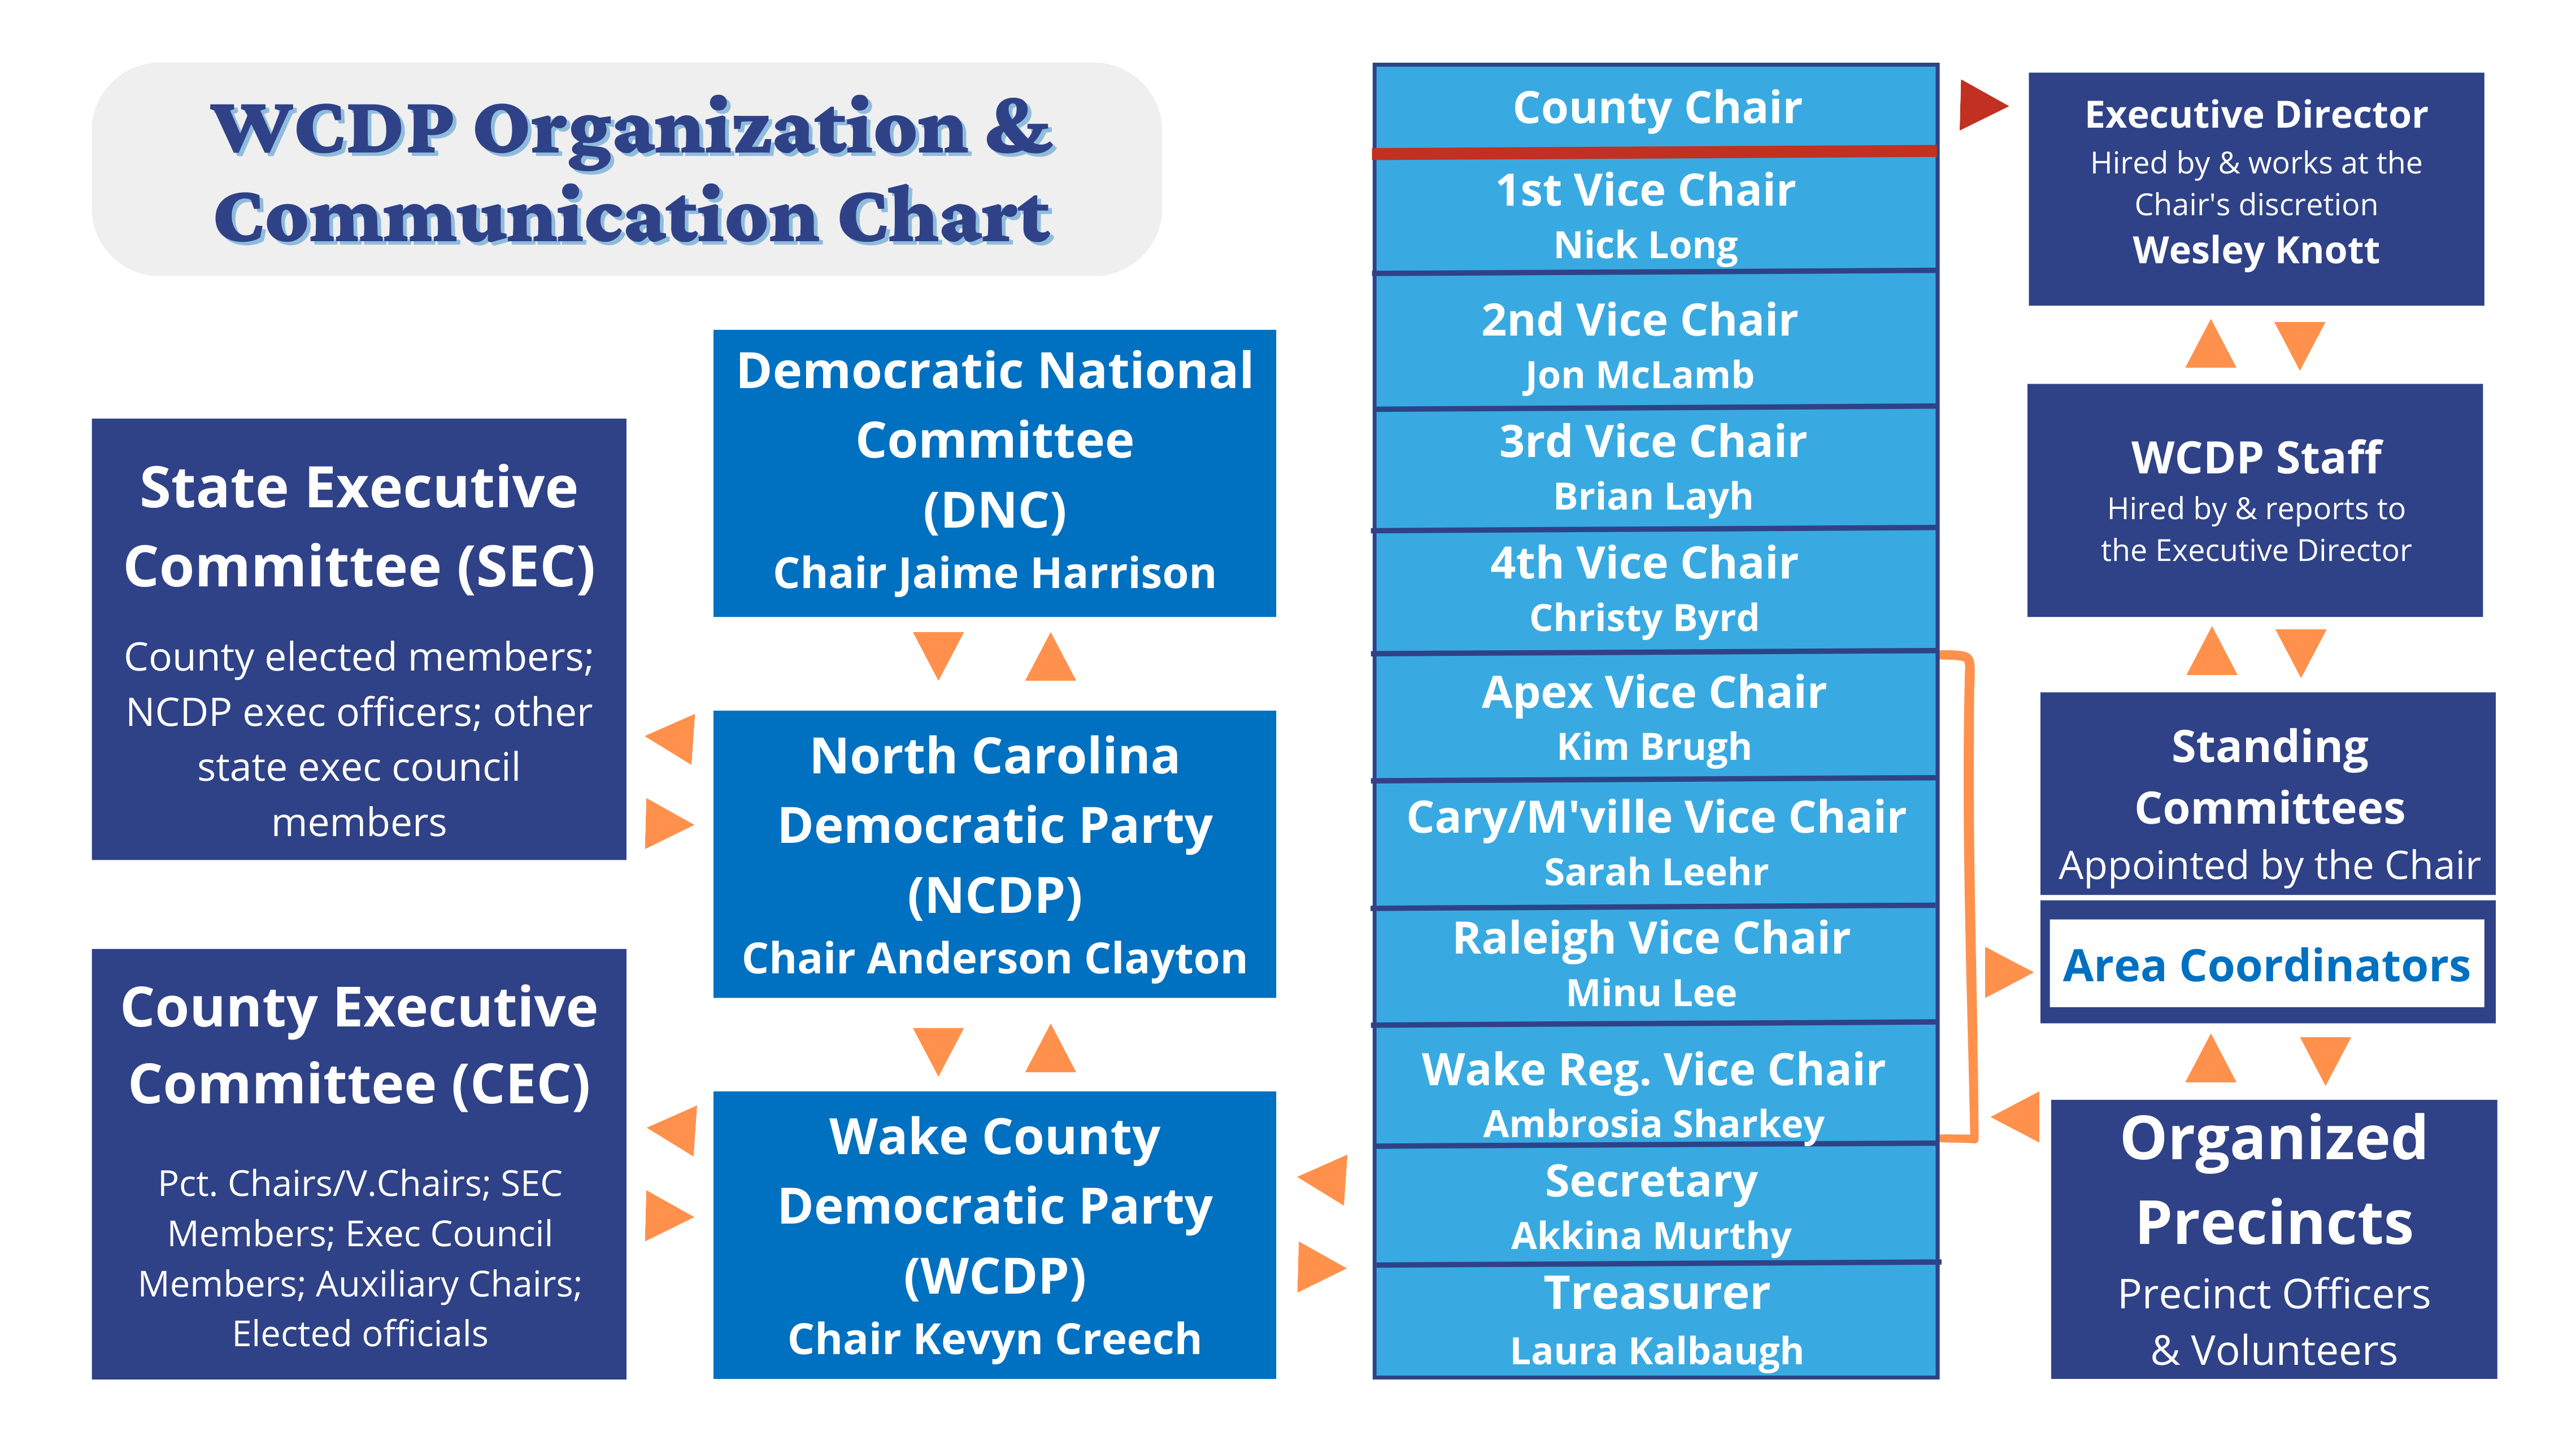 Updated Org and Communication Chart with Org Director